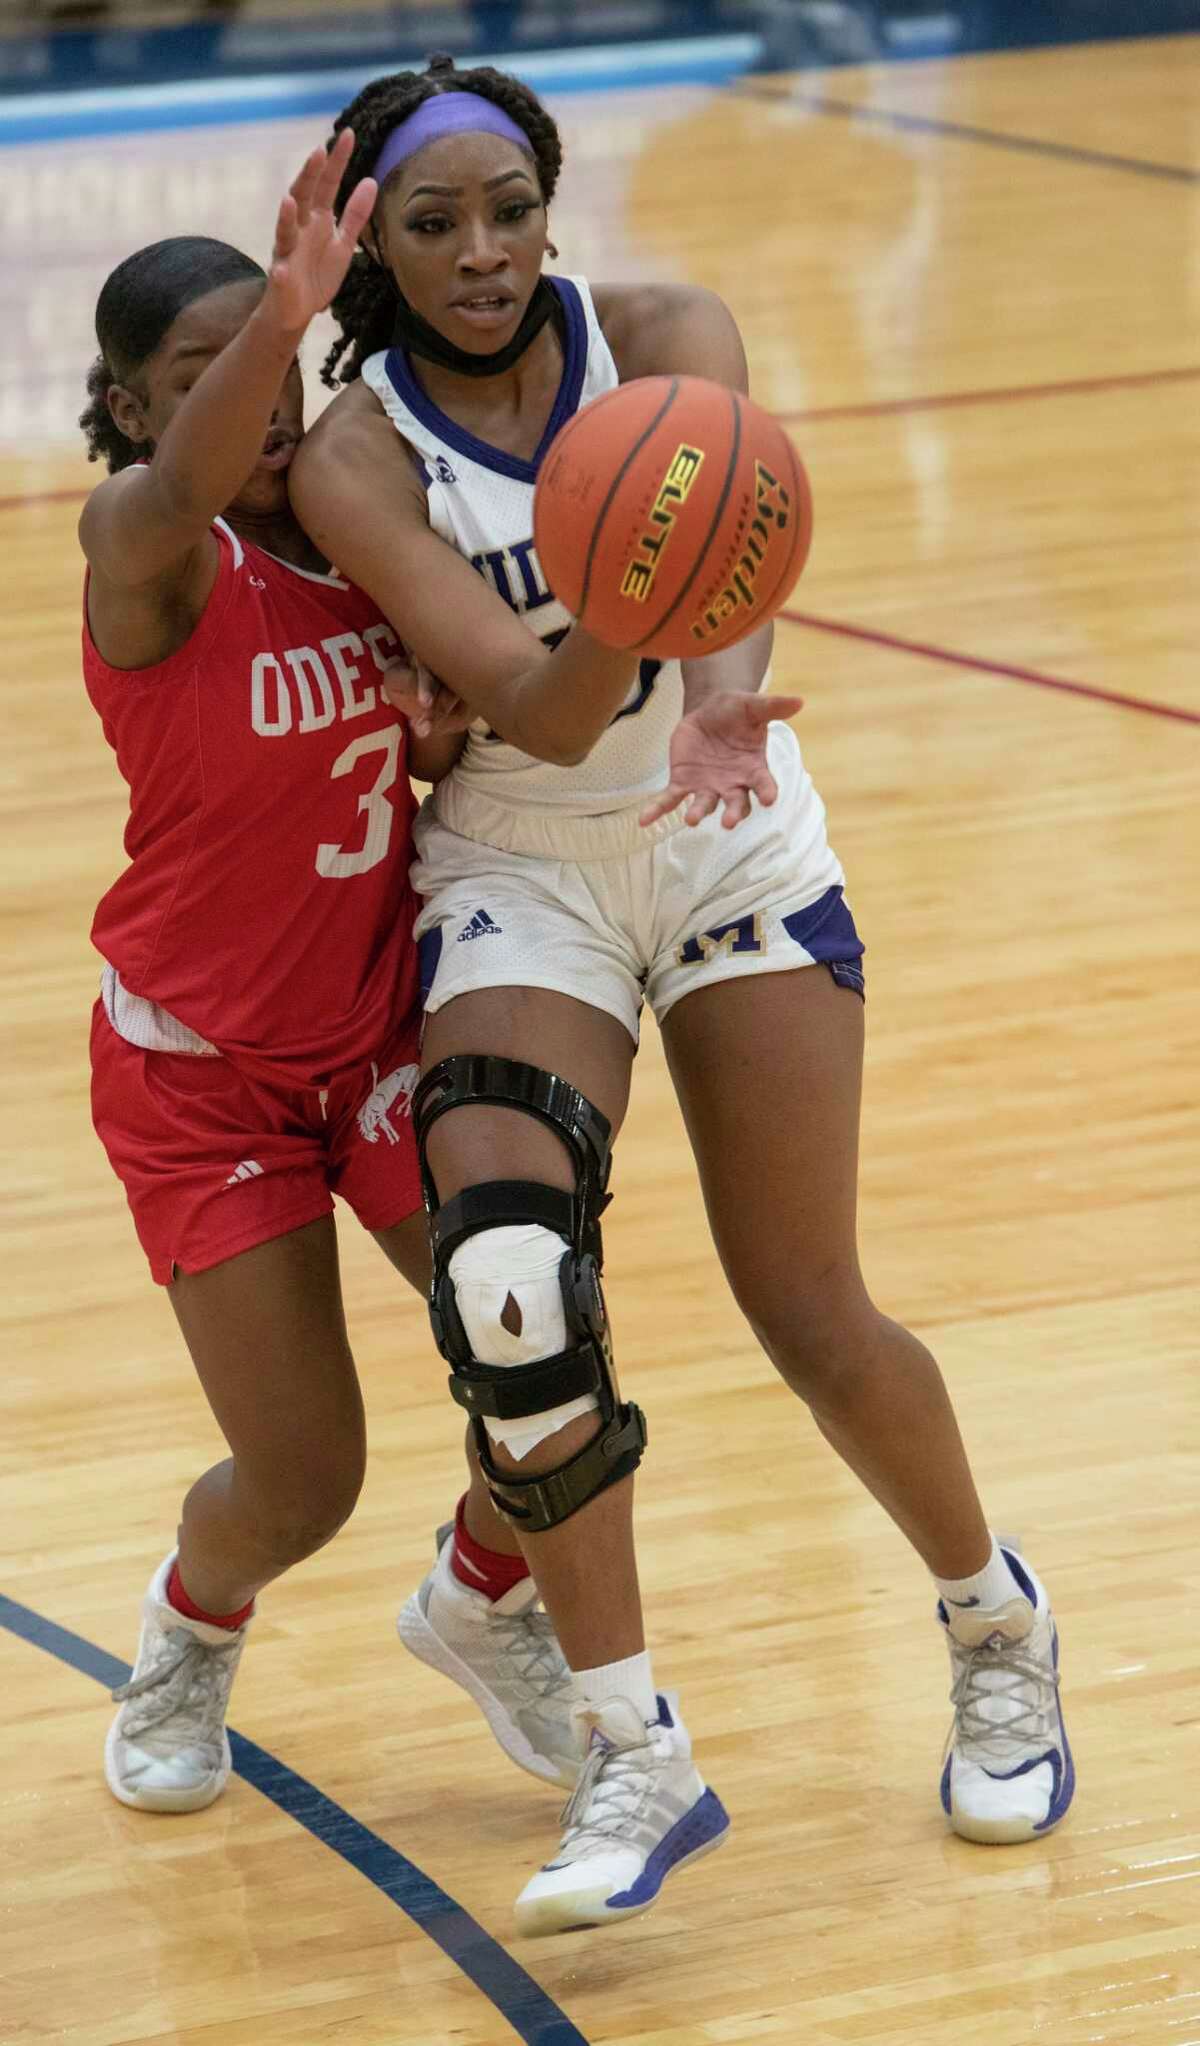 Midland High's Sam Braudaway tries to split Odessa High's Nesha Stephens, 3, and Paige Byford to drive the lane 12/15/2020 at the Odessa High gym. Tim Fischer/Reporter-Telegram